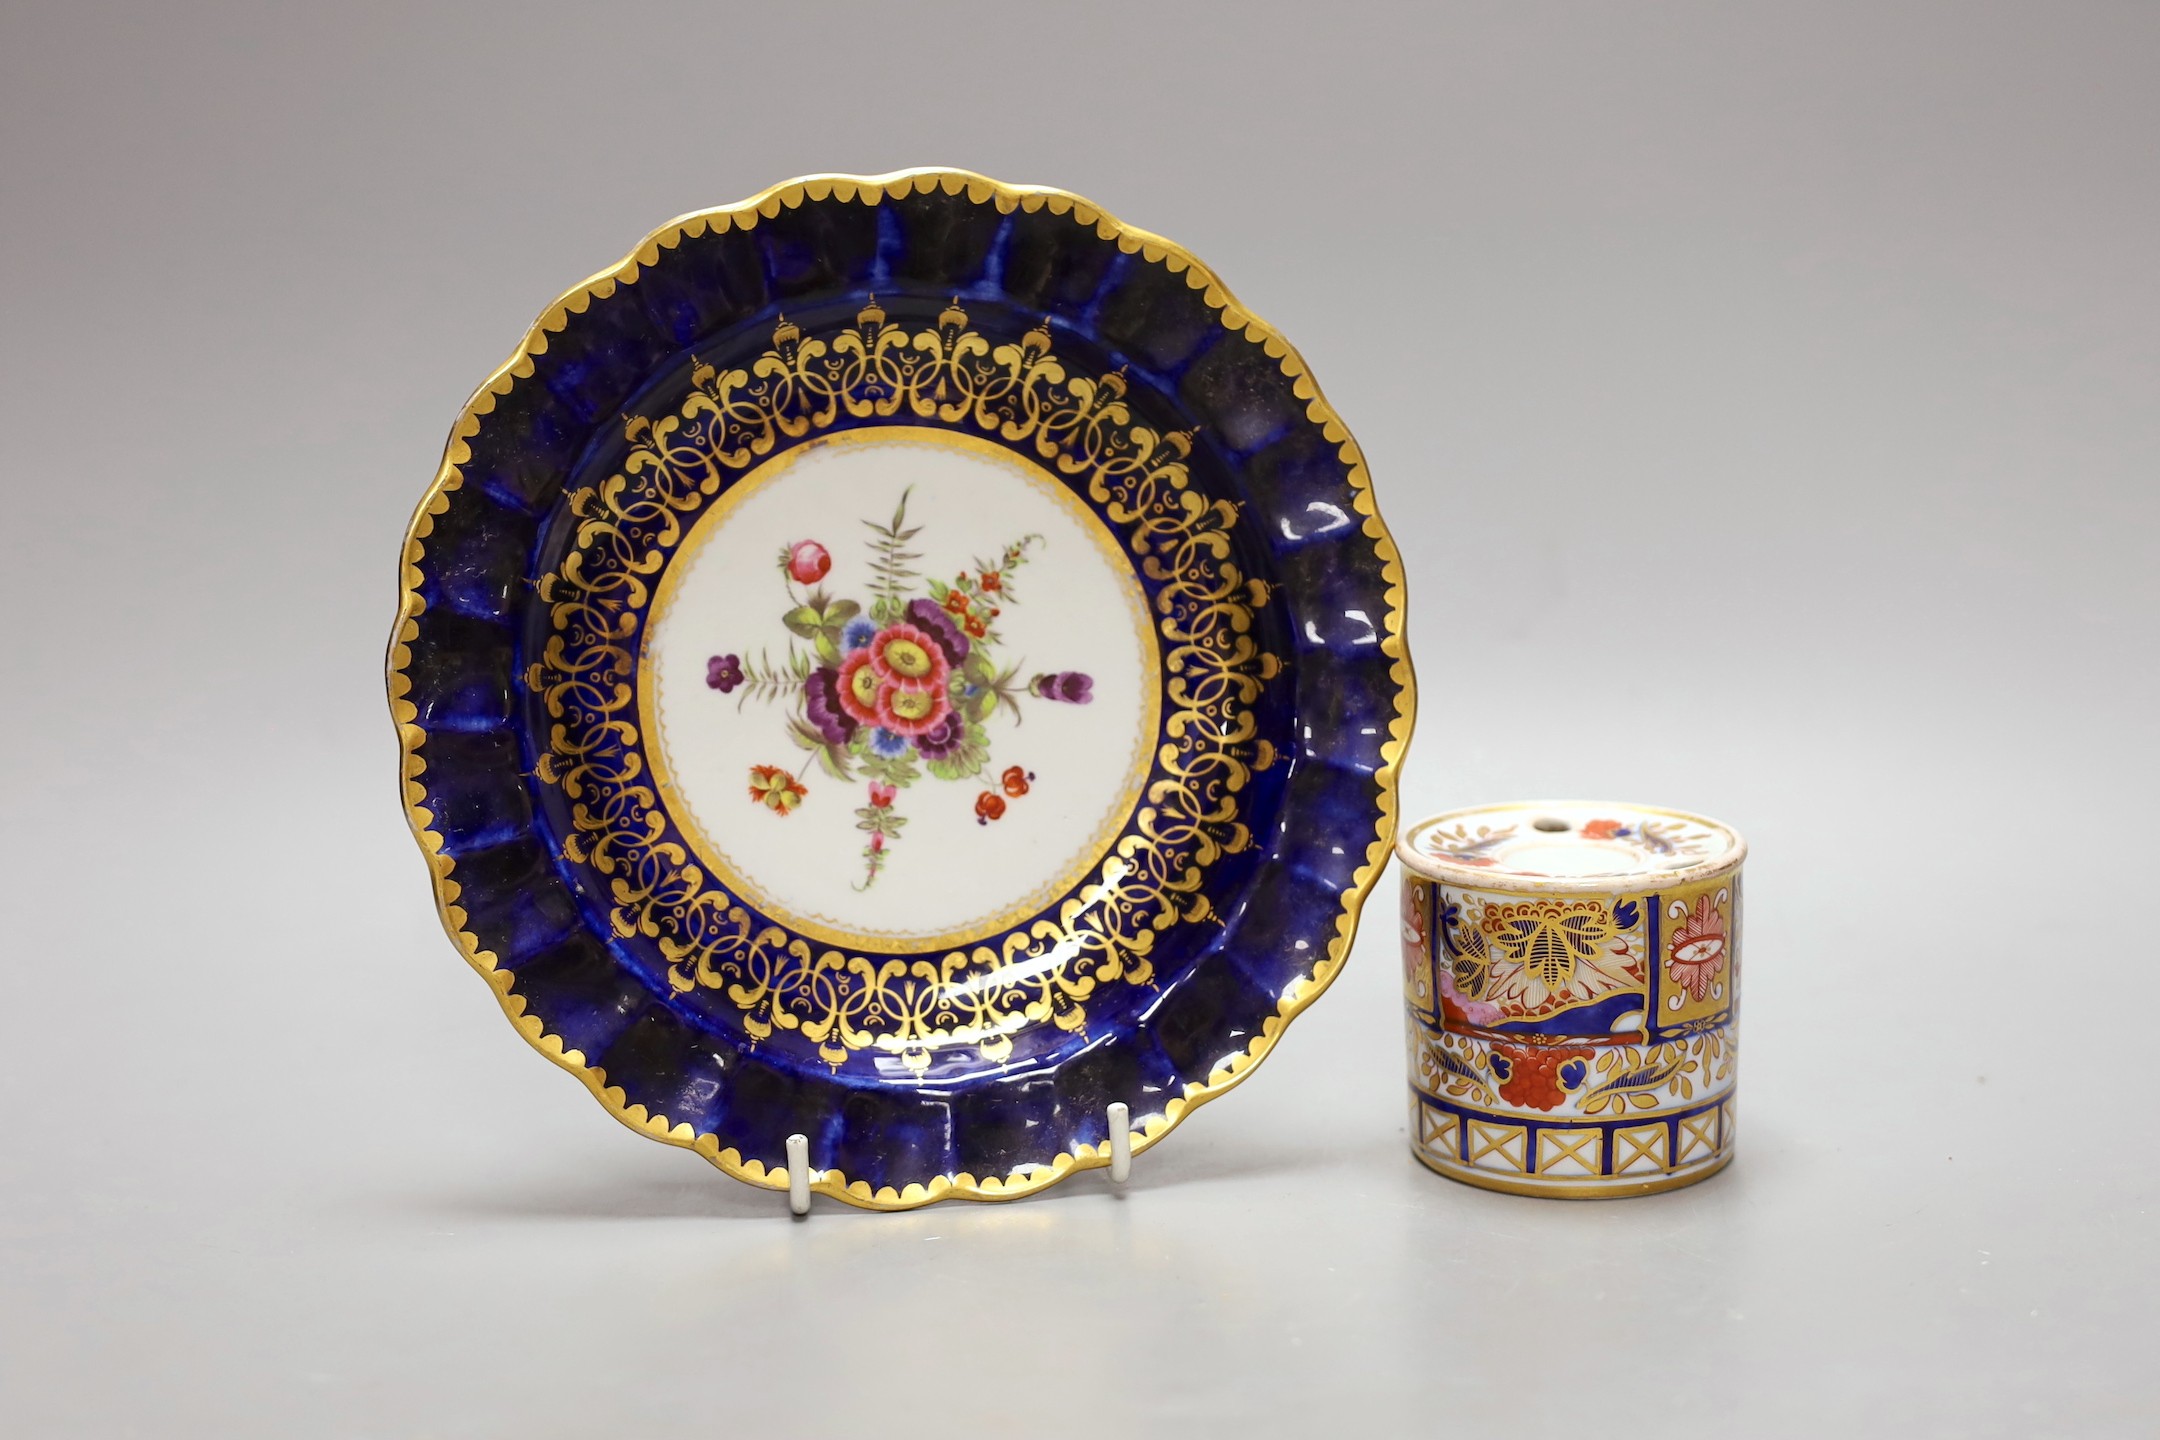 A Chamberlain drum-shaped inkwell painted with an imari pattern 240 and a Chamberlain plate